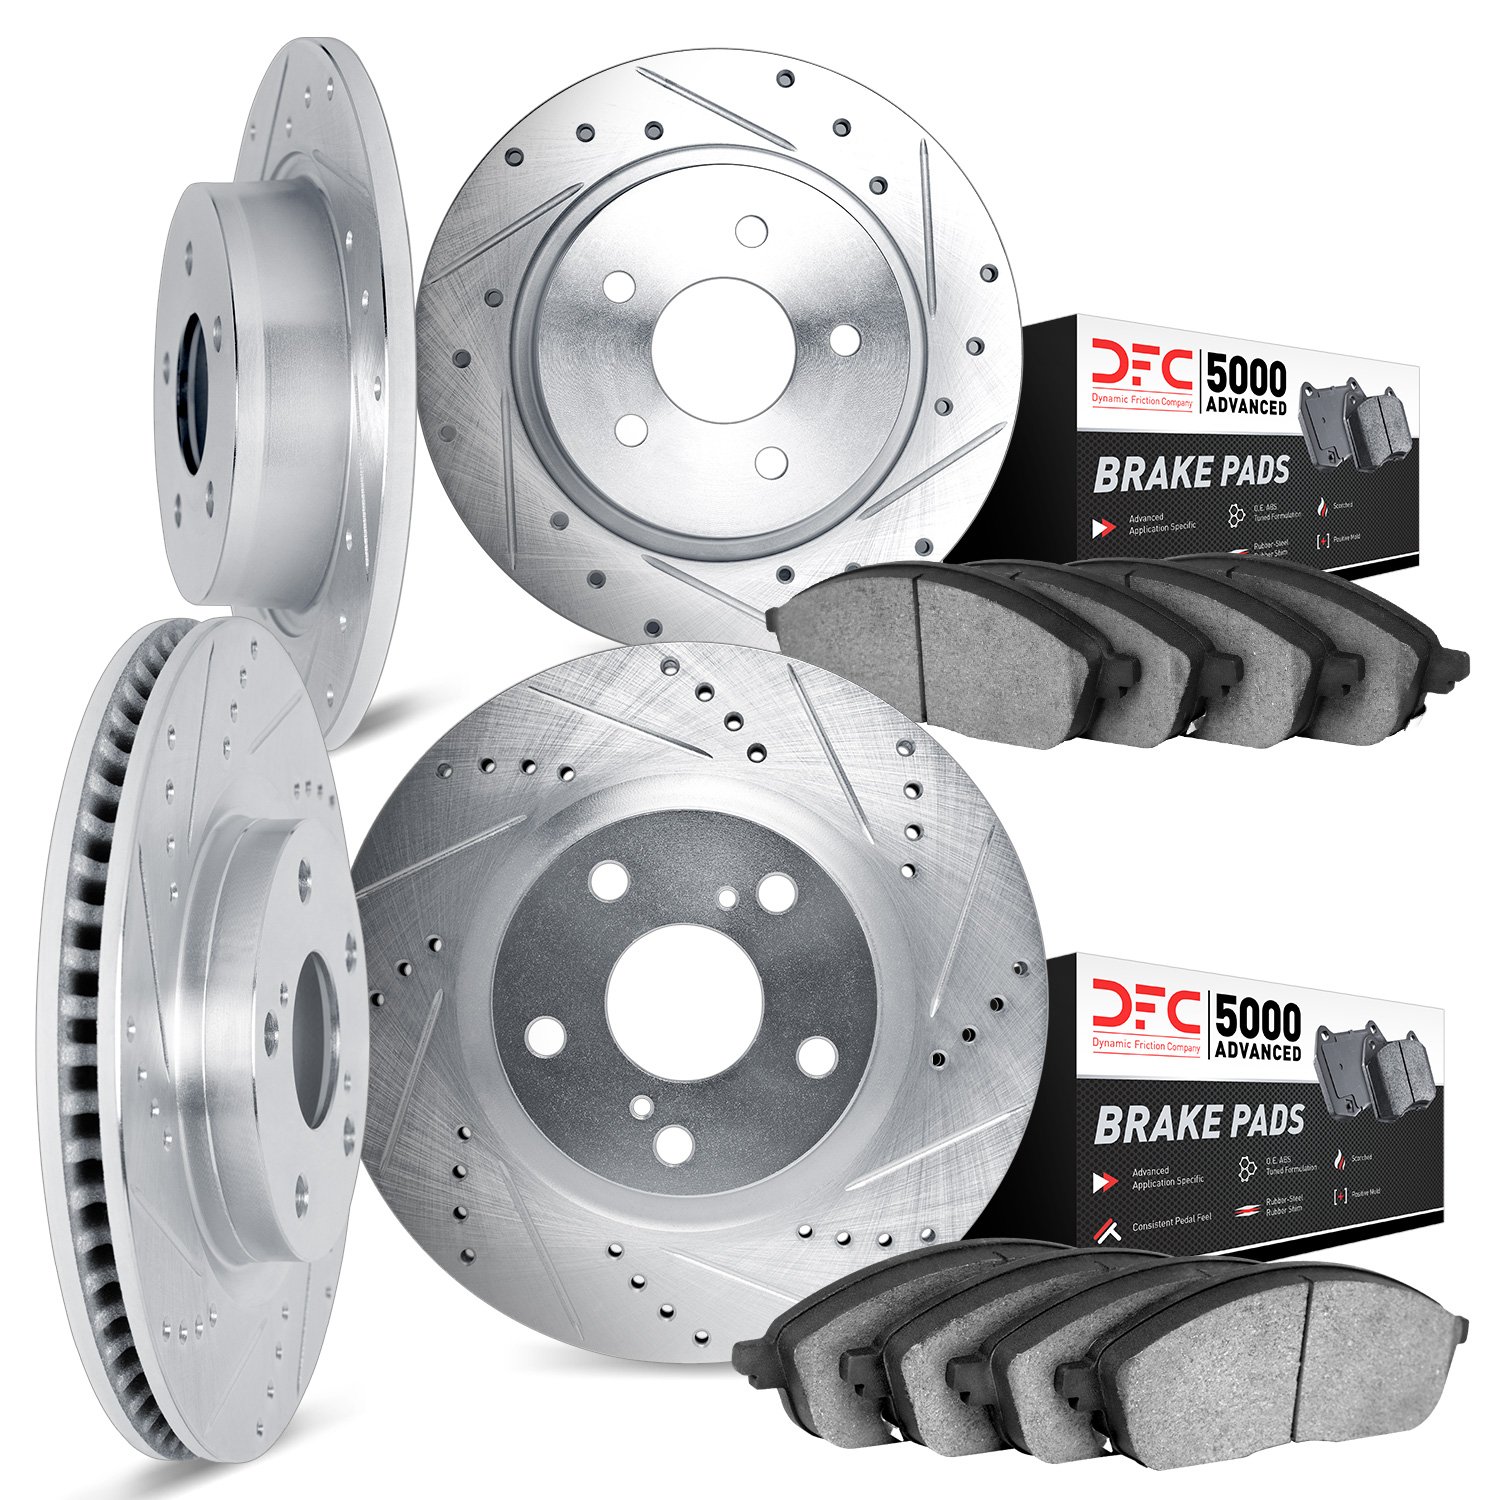 7504-58019 Drilled/Slotted Brake Rotors w/5000 Advanced Brake Pads Kit [Silver], 2014-2016 Acura/Honda, Position: Front and Rear